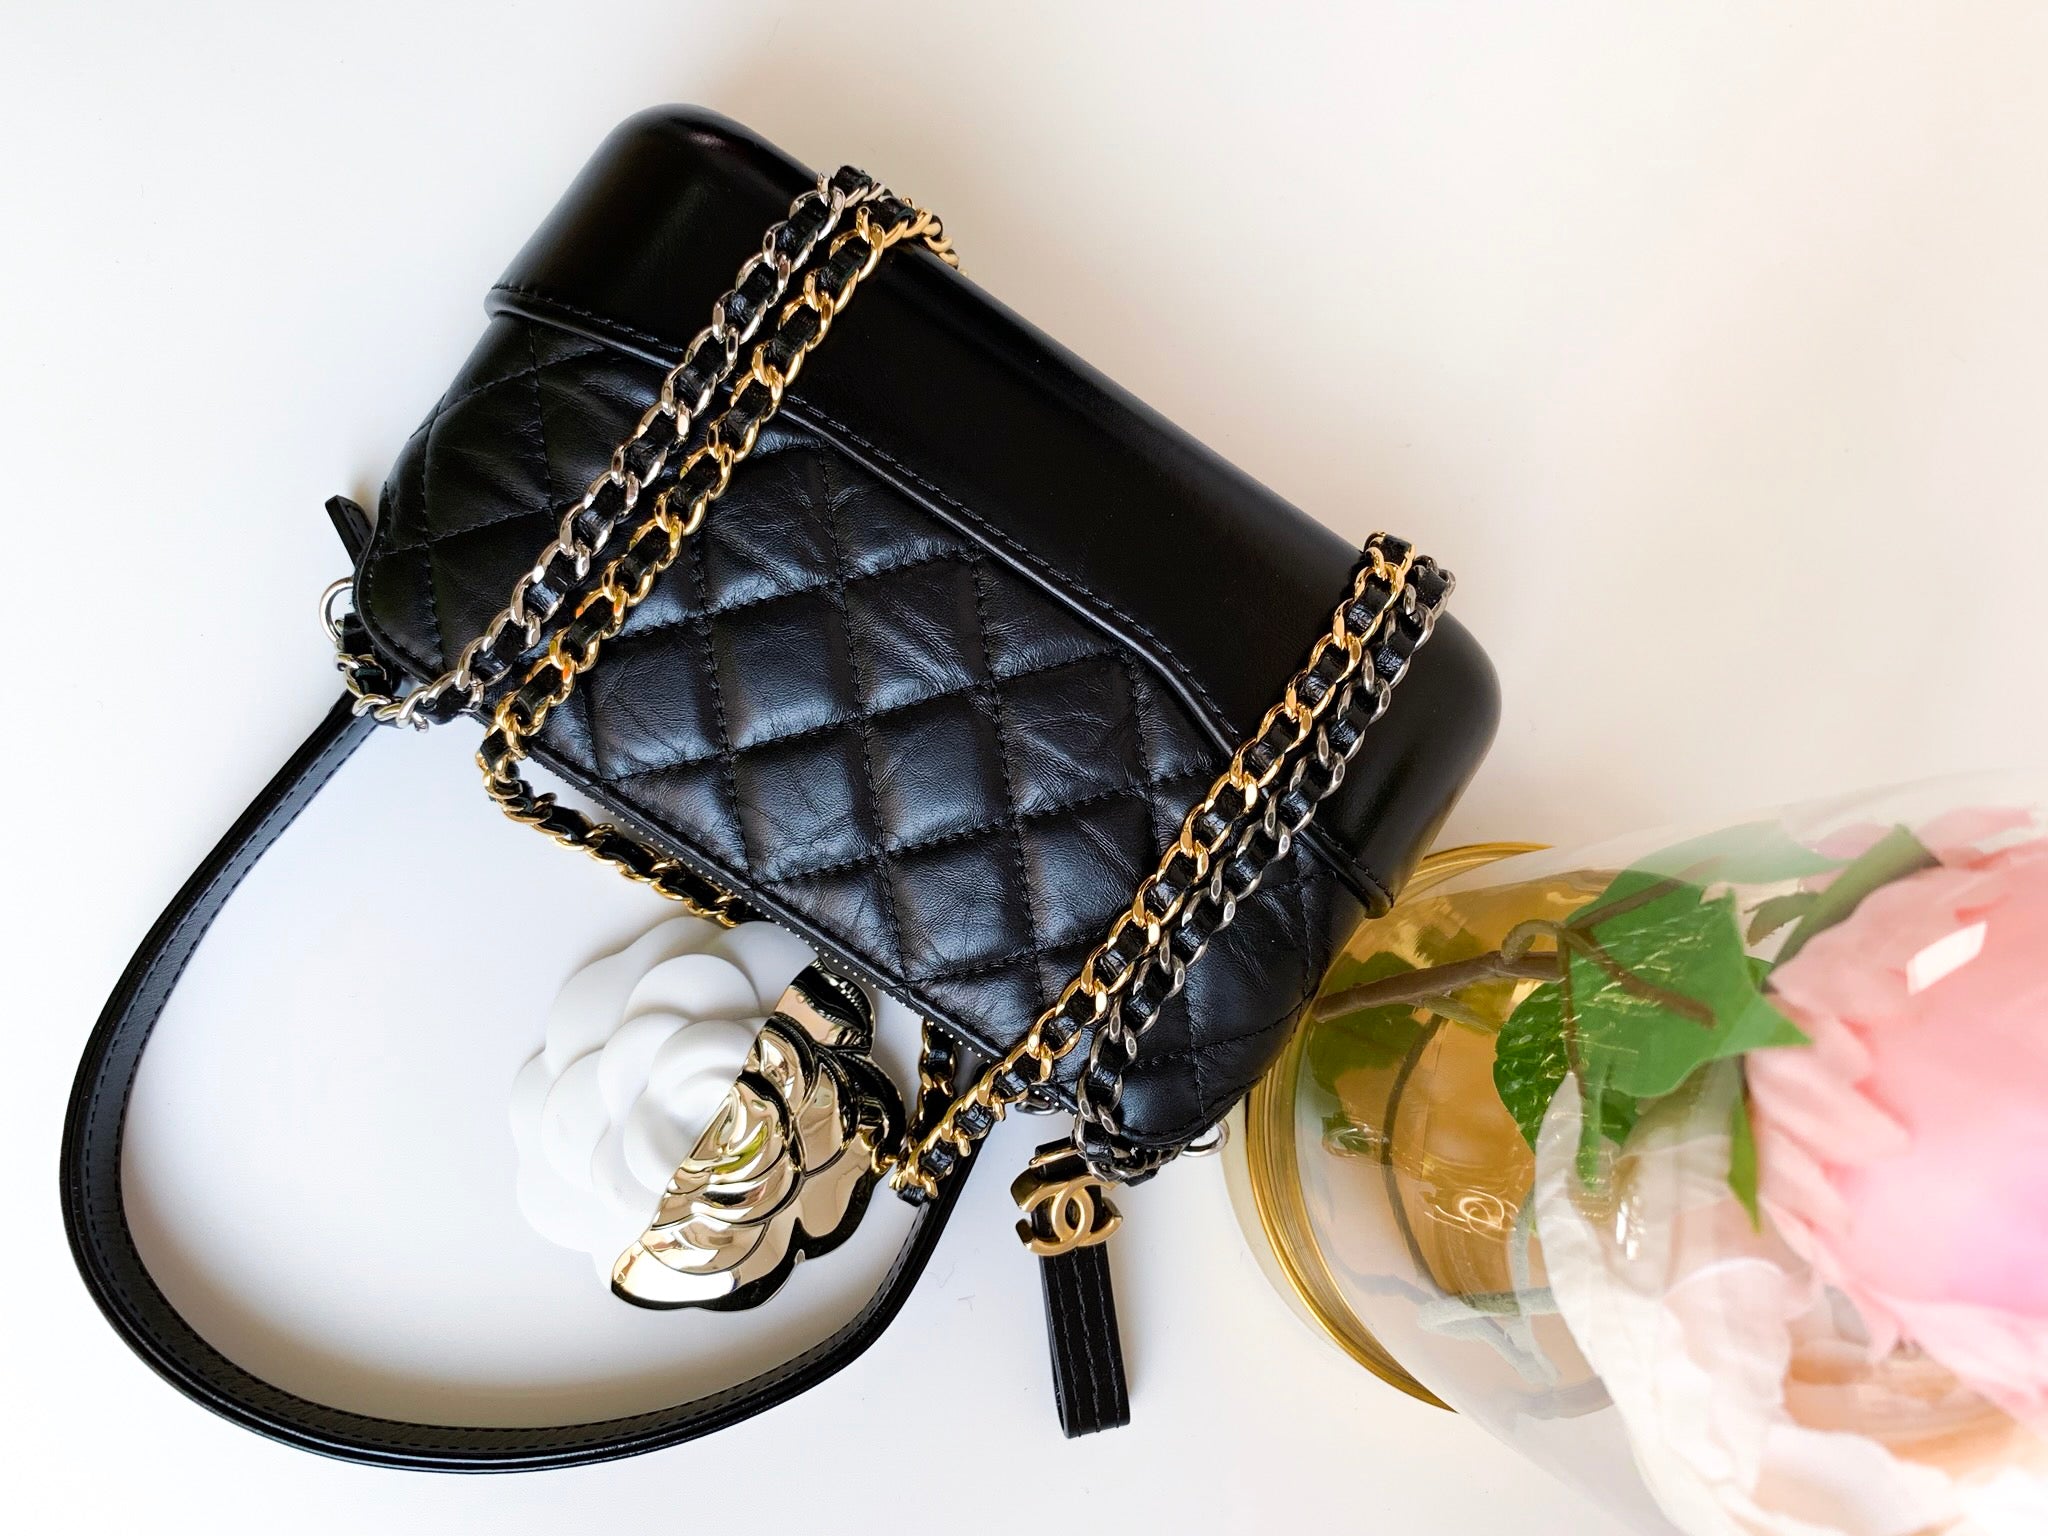 Chanel Black Gabrielle Clutch with Chain – Coco Approved Studio